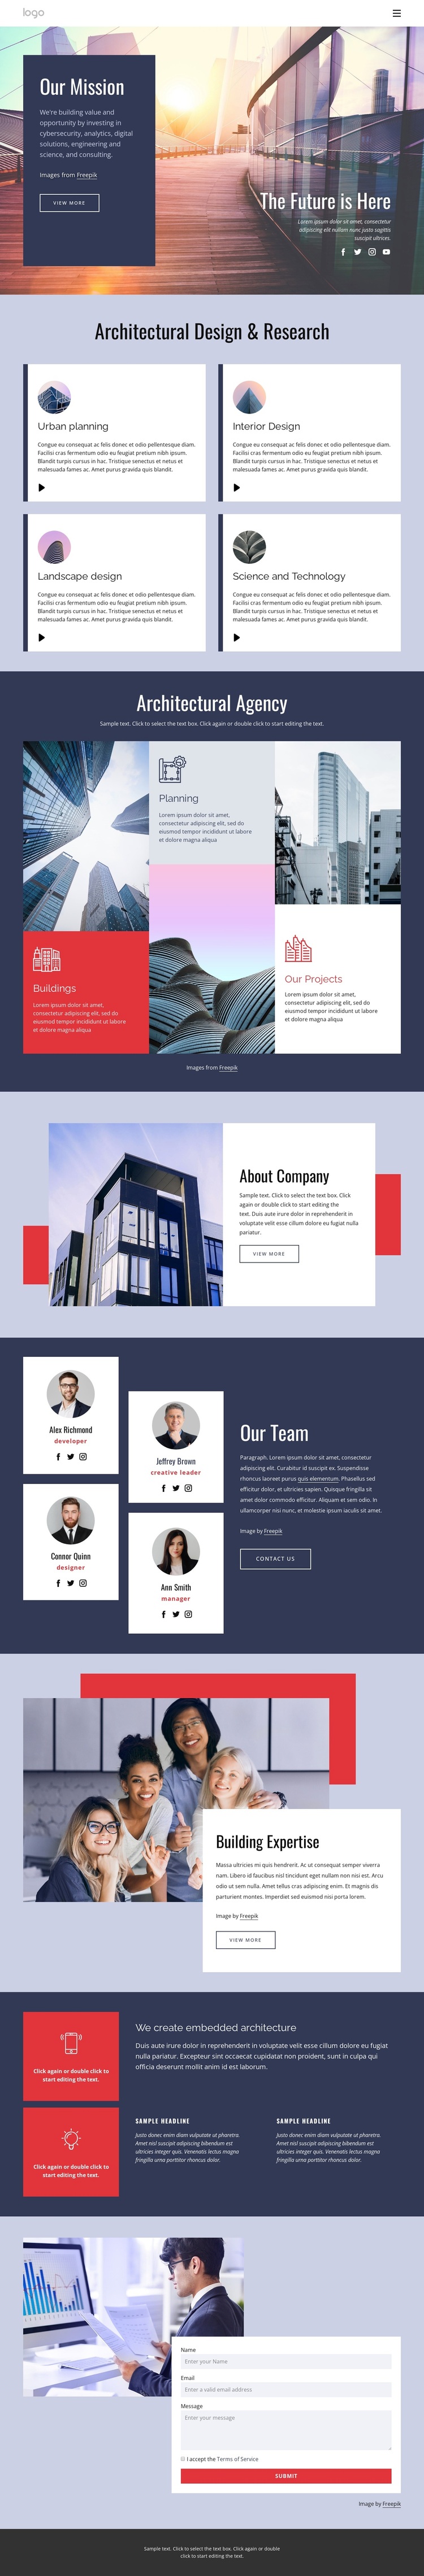 Dynamic architectural design Template